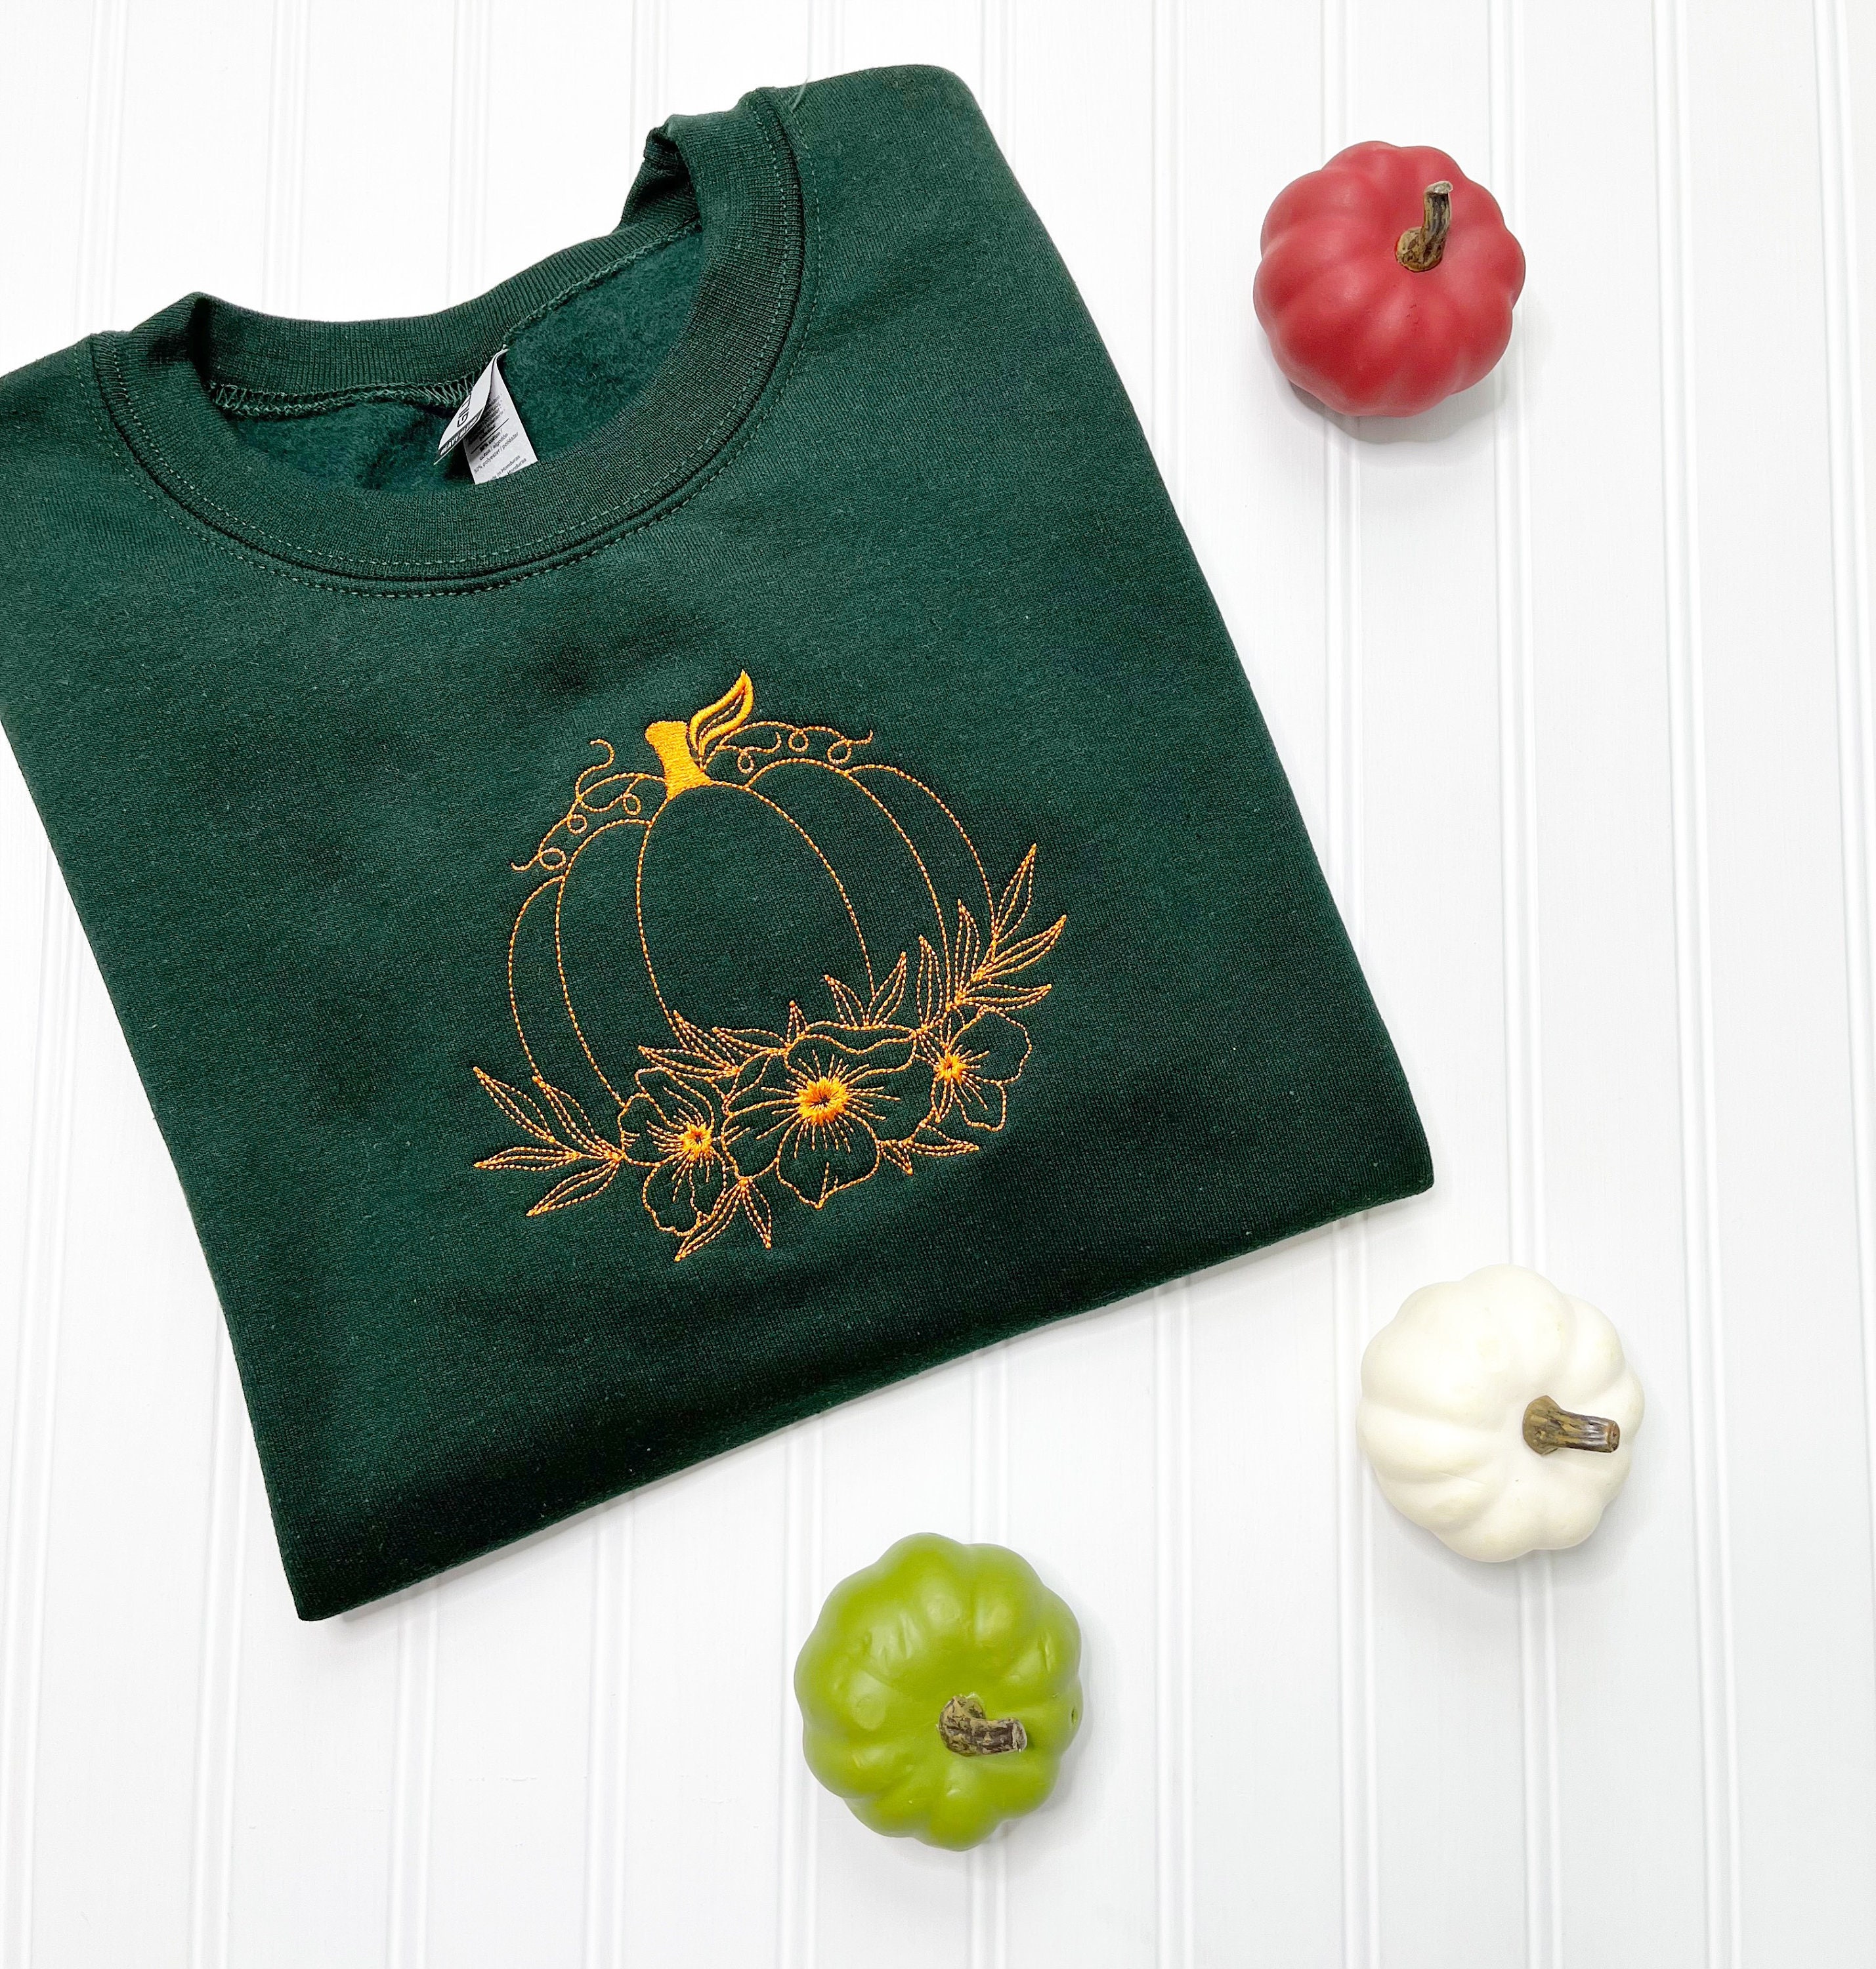 Discover Embroidered Pumpkin Sweatshirt- Fall Pumpkin Sweatshirt - Cozy Autumn Sweatshirt